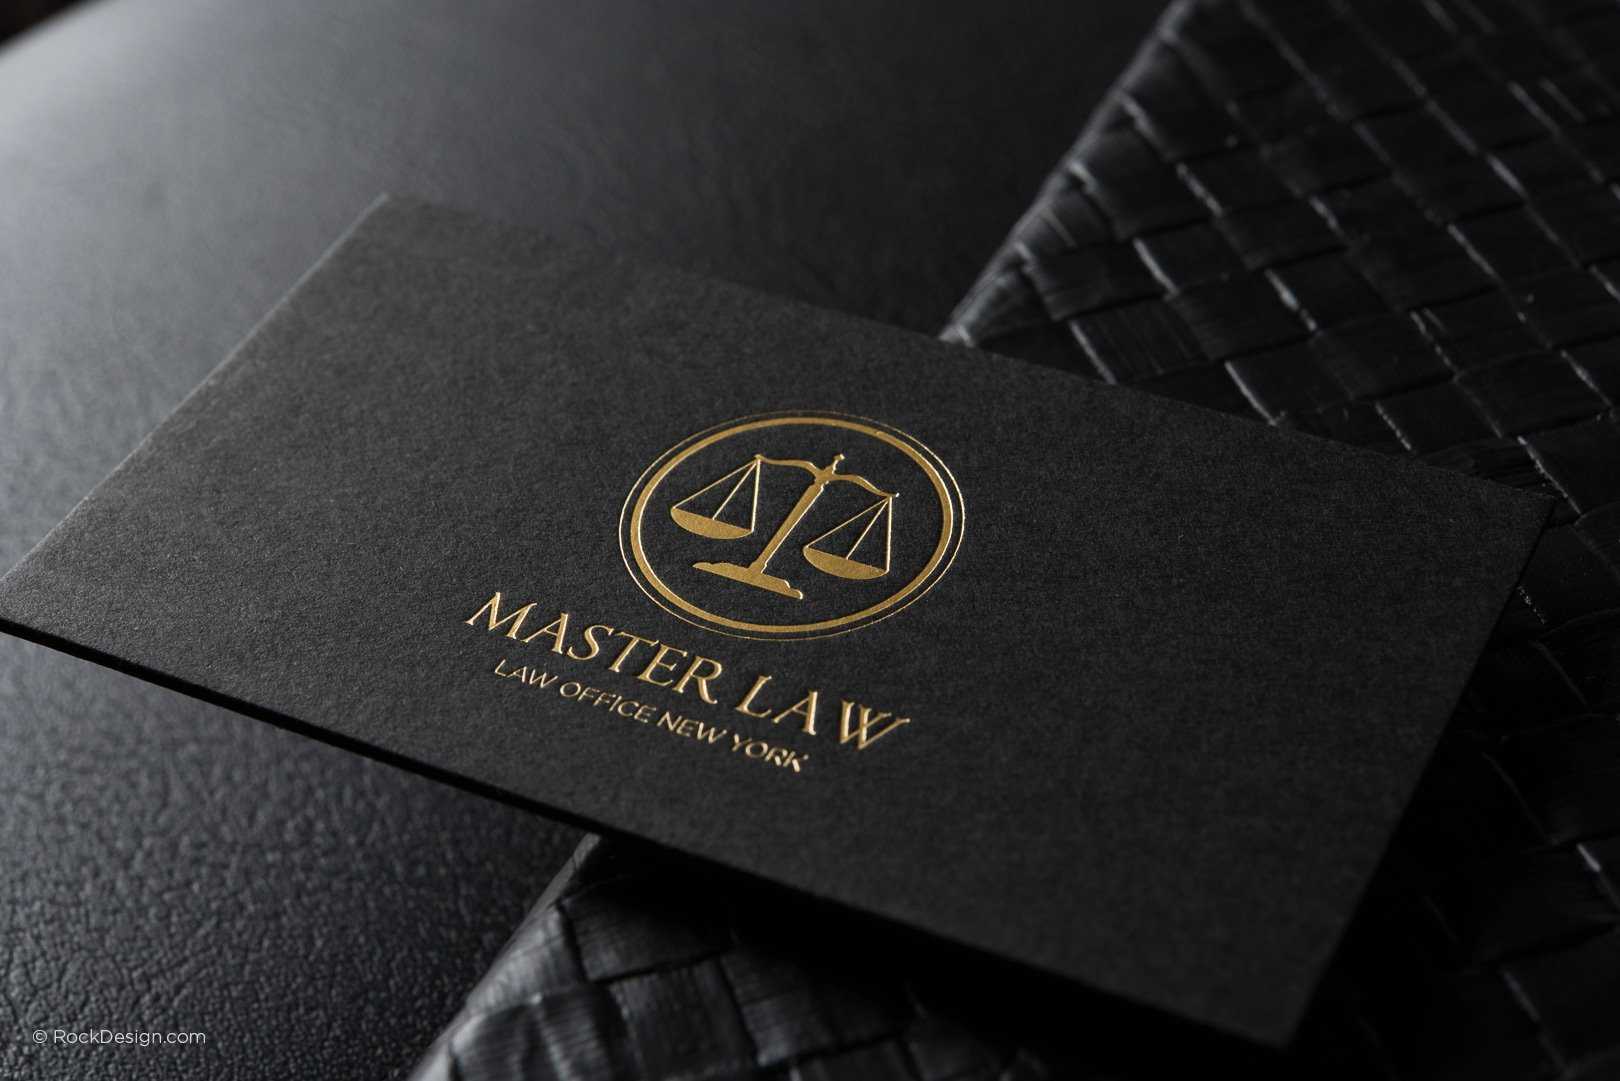 Free Lawyer Business Card Template | Rockdesign Within Legal Business Cards Templates Free